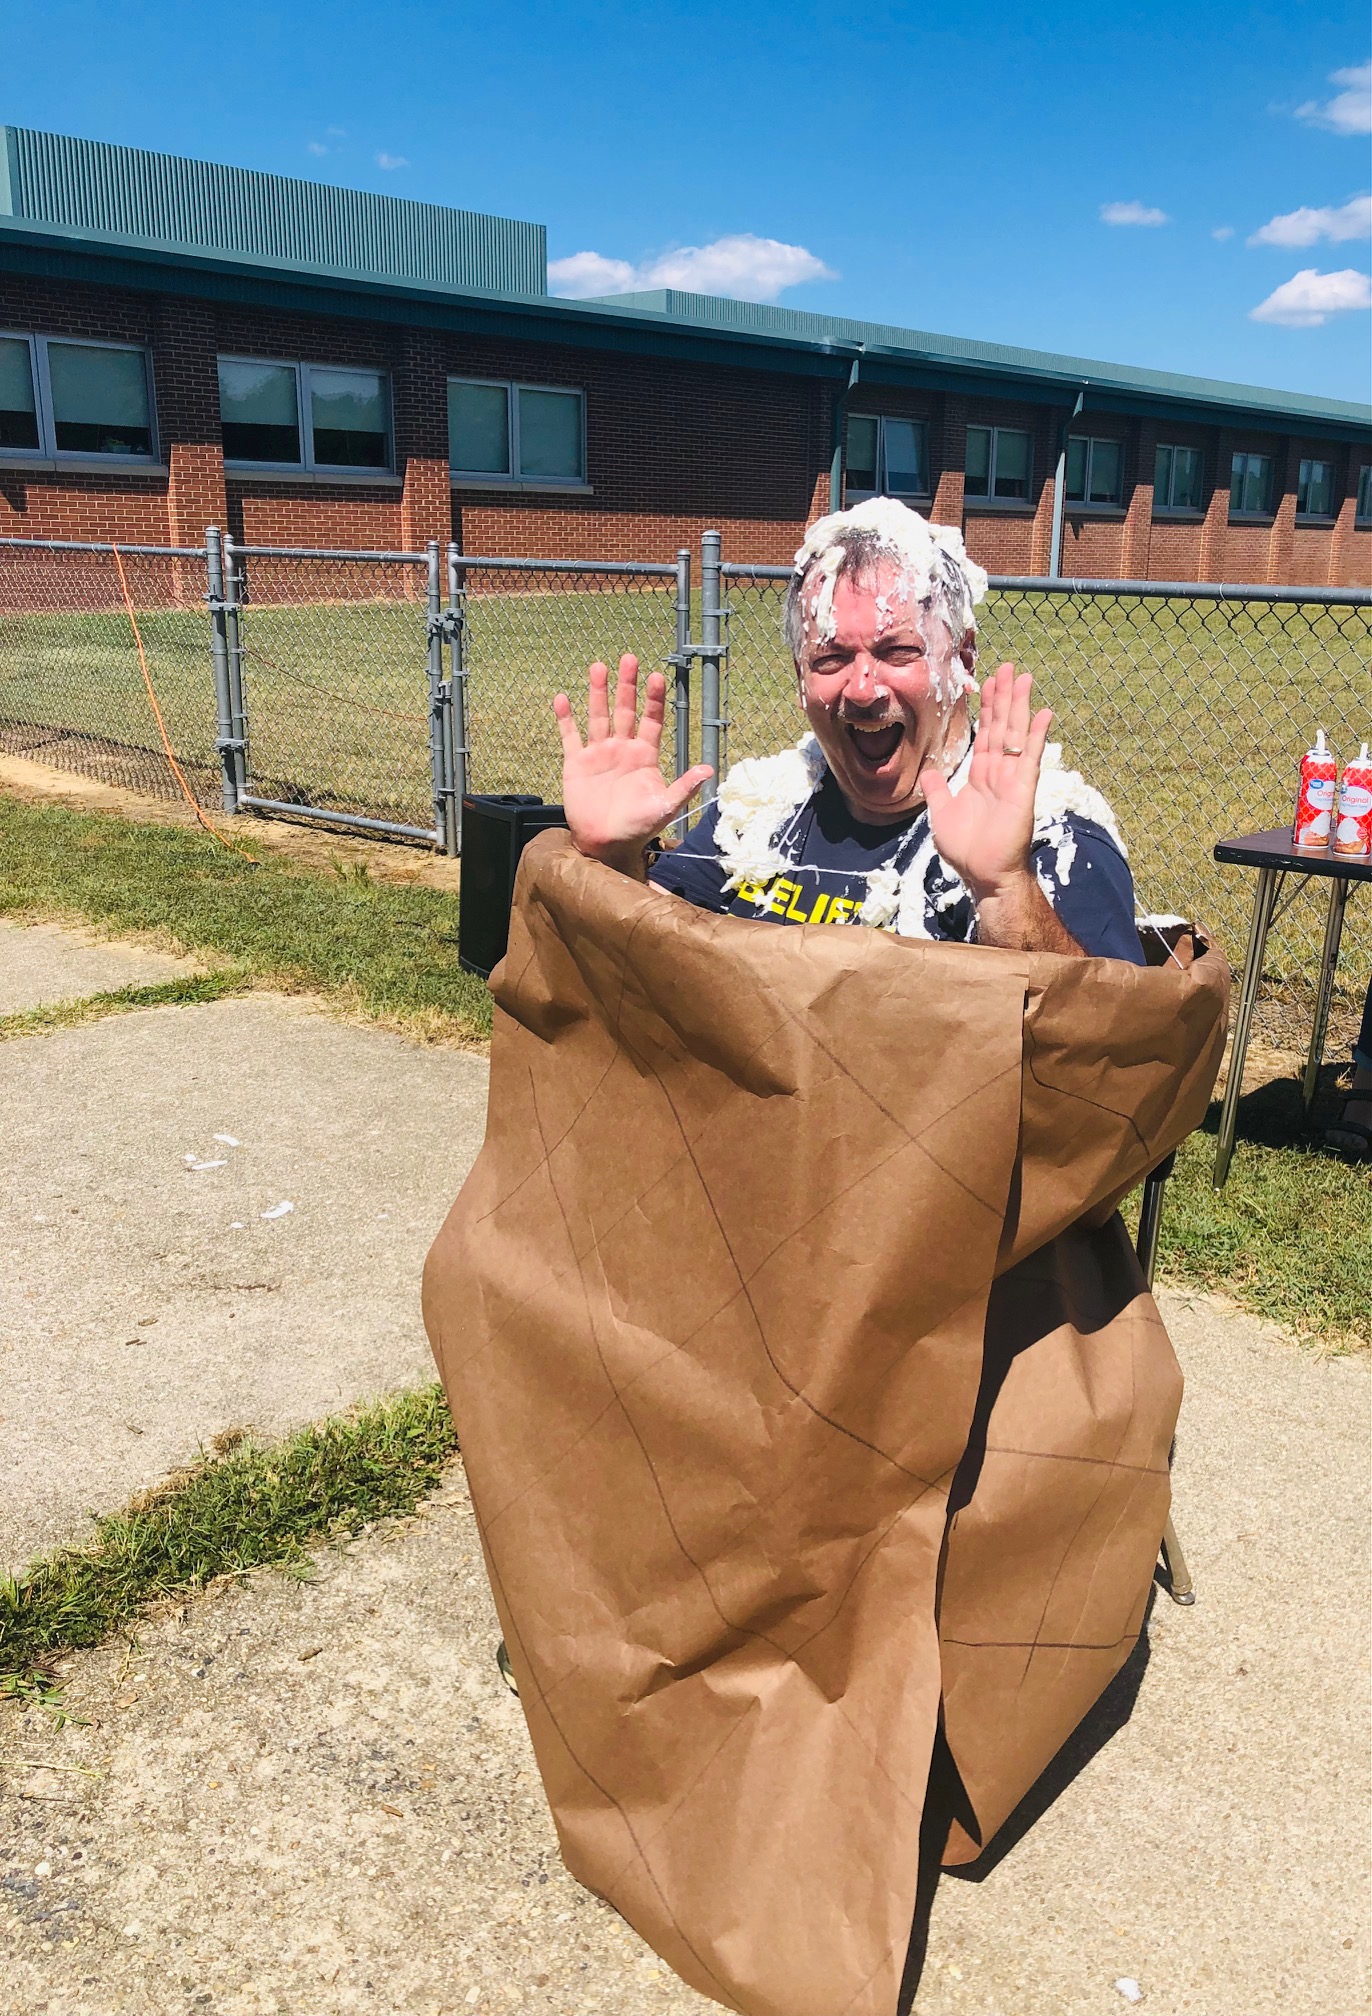 Mr. Meyers after being creamed with whipped cream.